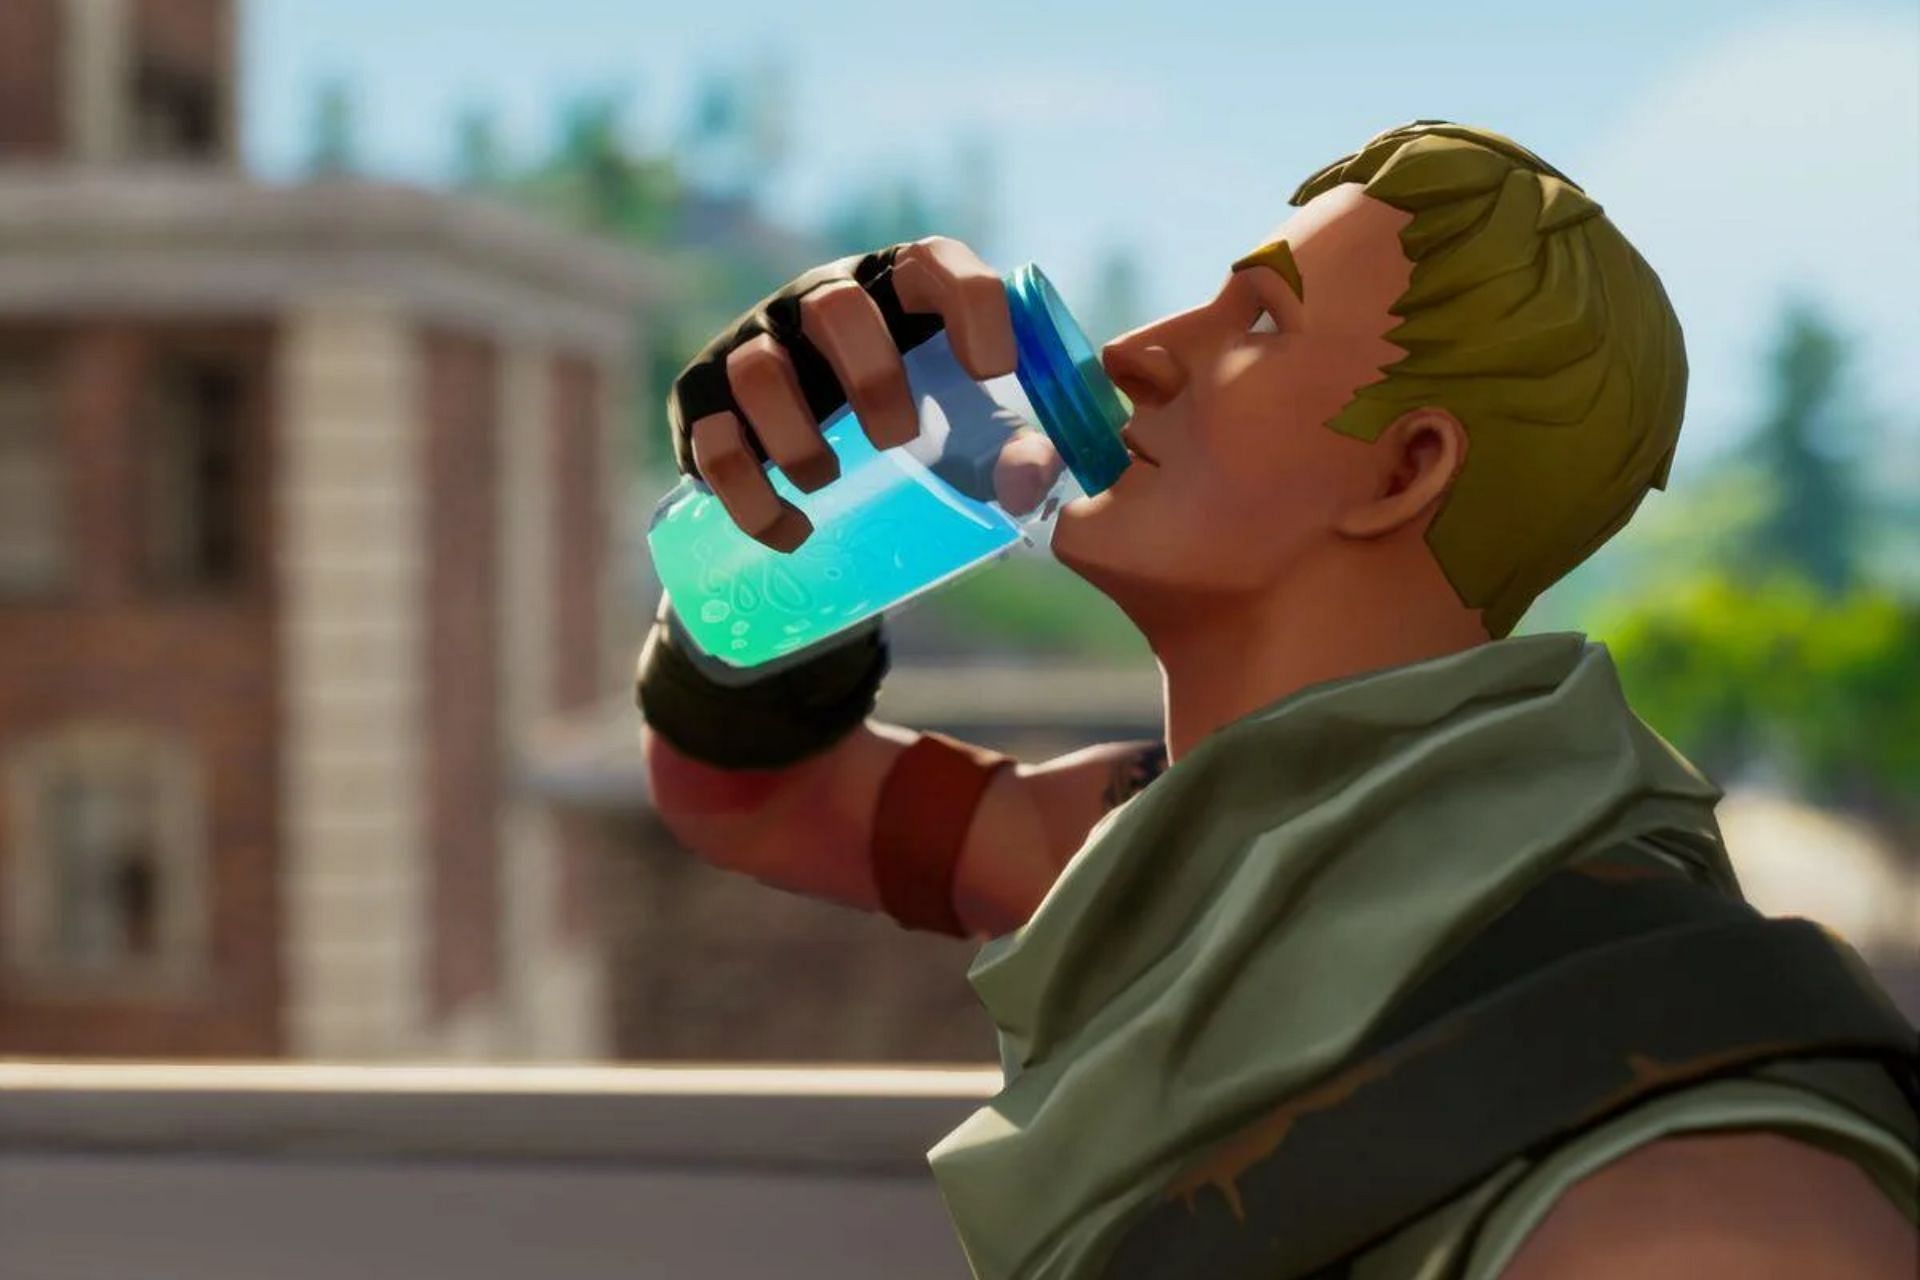 Fortnite player recreates in-game Shield Potions in real life (Image via Epic Games)